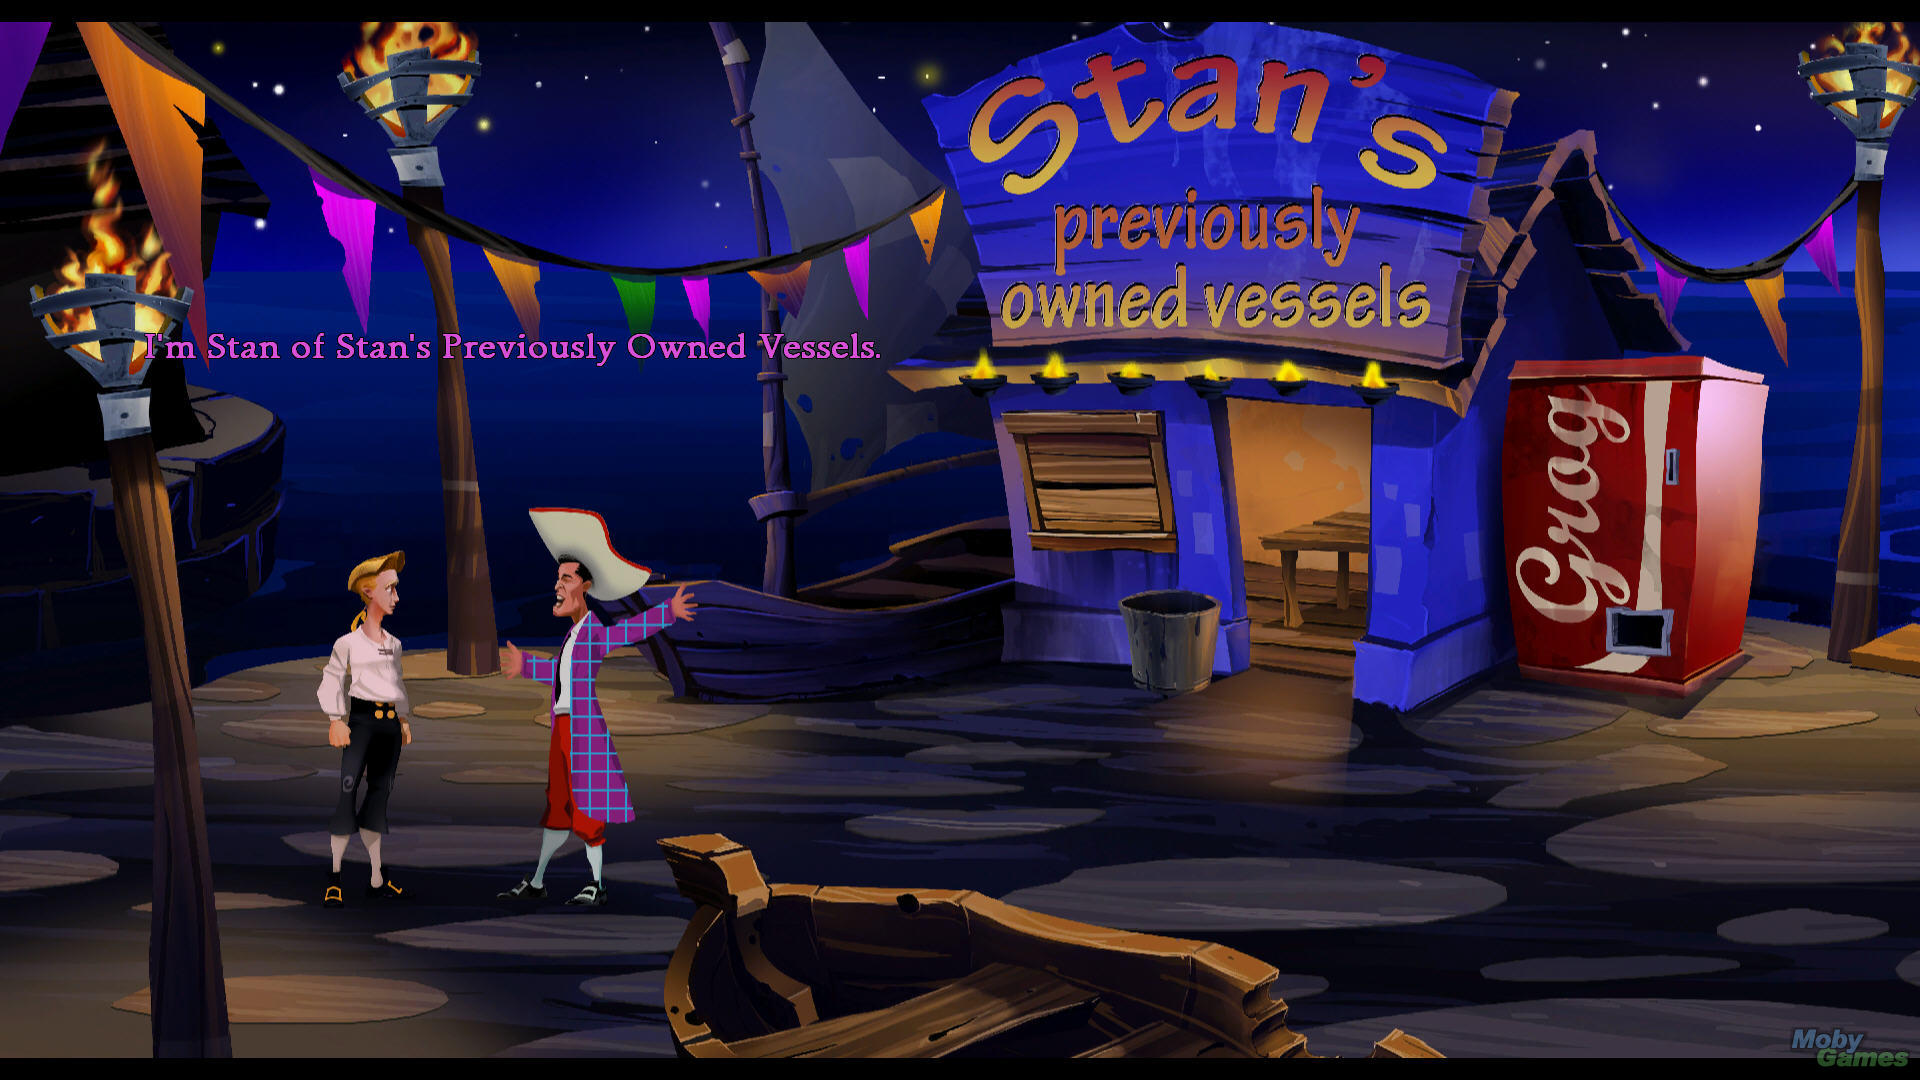 Nice Images Collection: The Secret Of Monkey Island Desktop Wallpapers